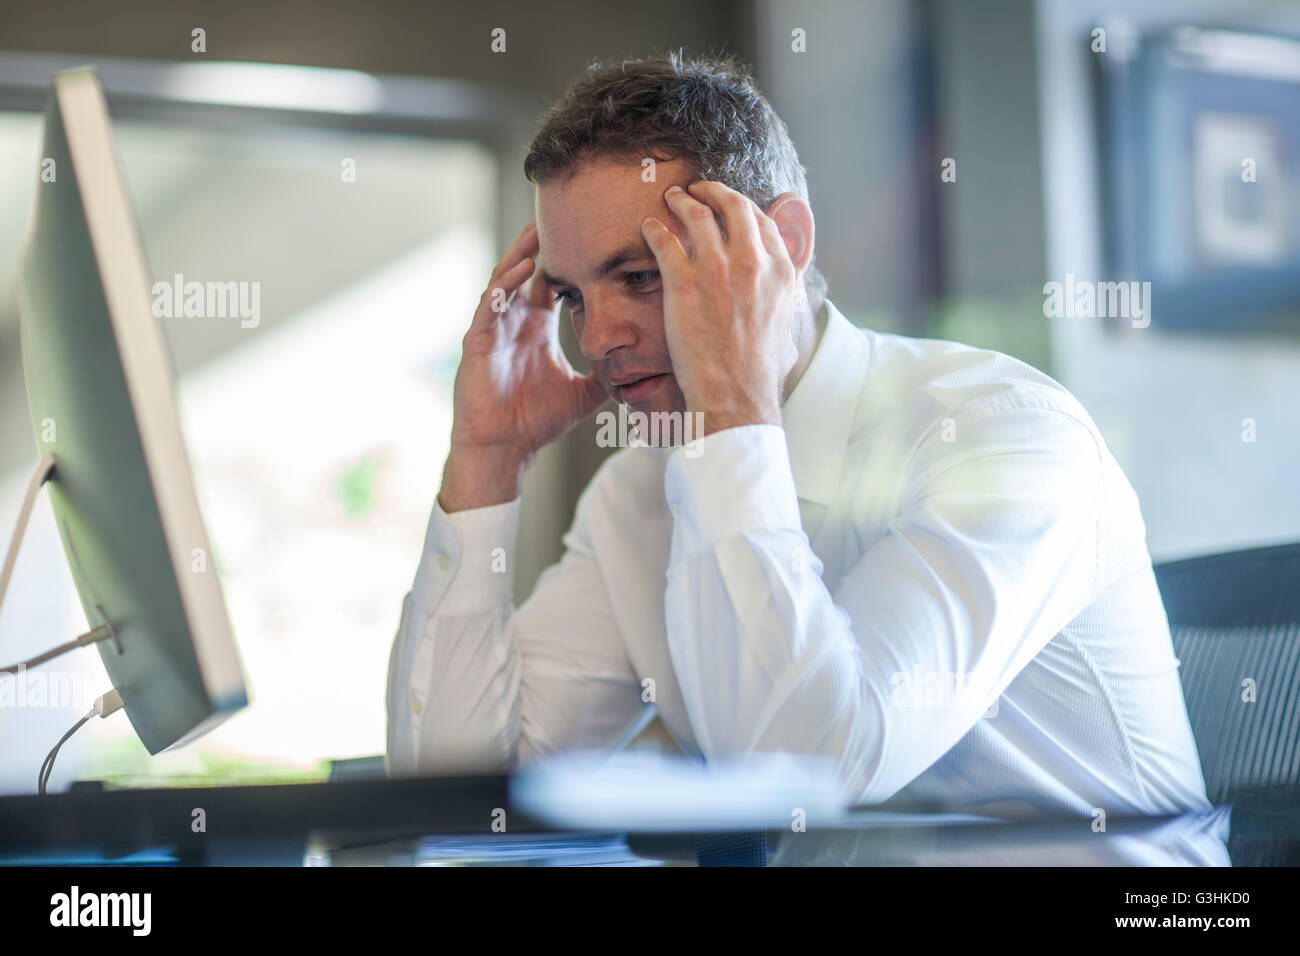 Stressed businessman with hands on forehead at office desk Stock Photo